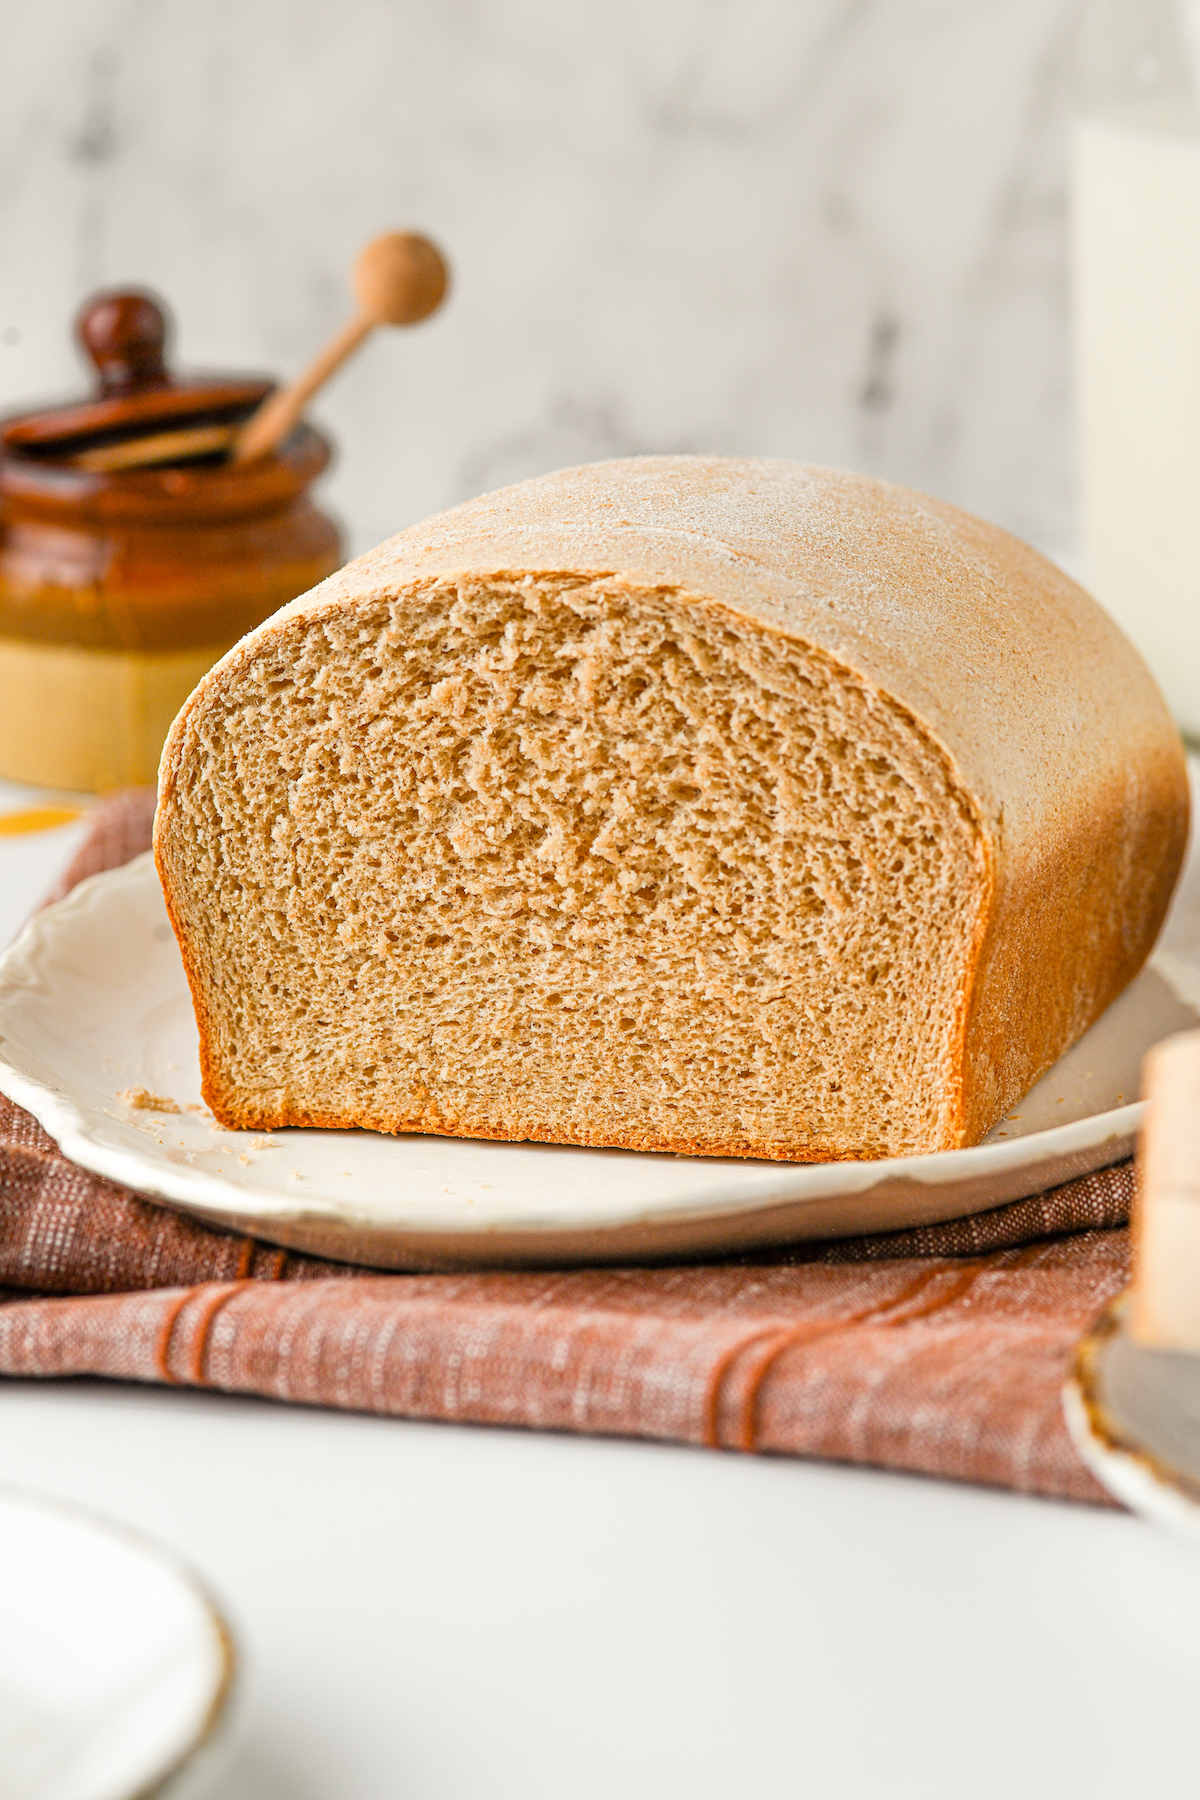 Side view of a cut loaf of bread, showing the texture of the interior.